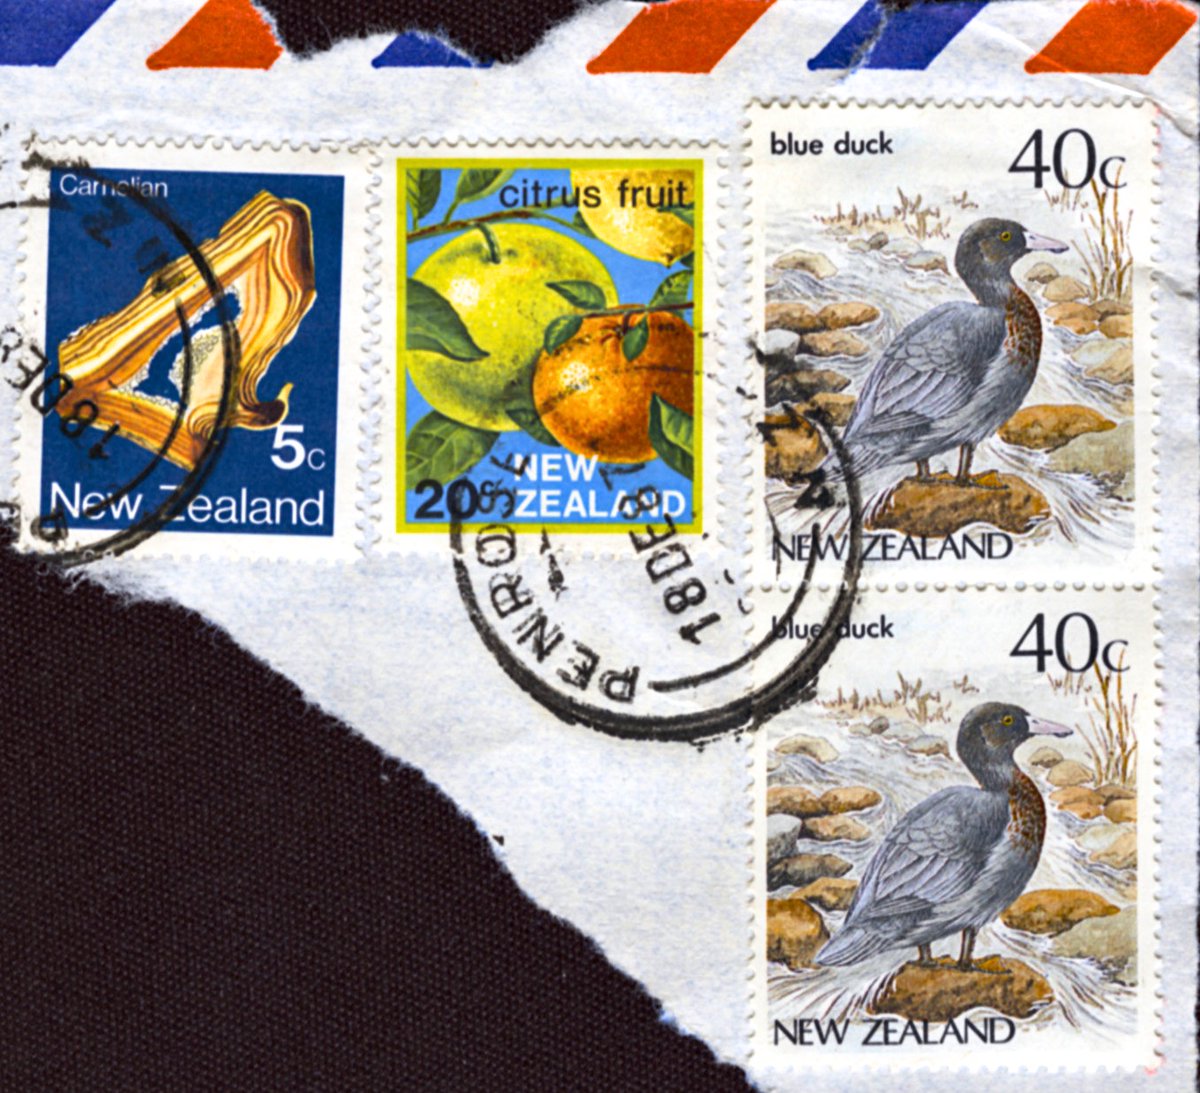 Stamp scans from New Zealand for mail sent to California in 1988. 

#Stamps #stampart #stampcollector #mail